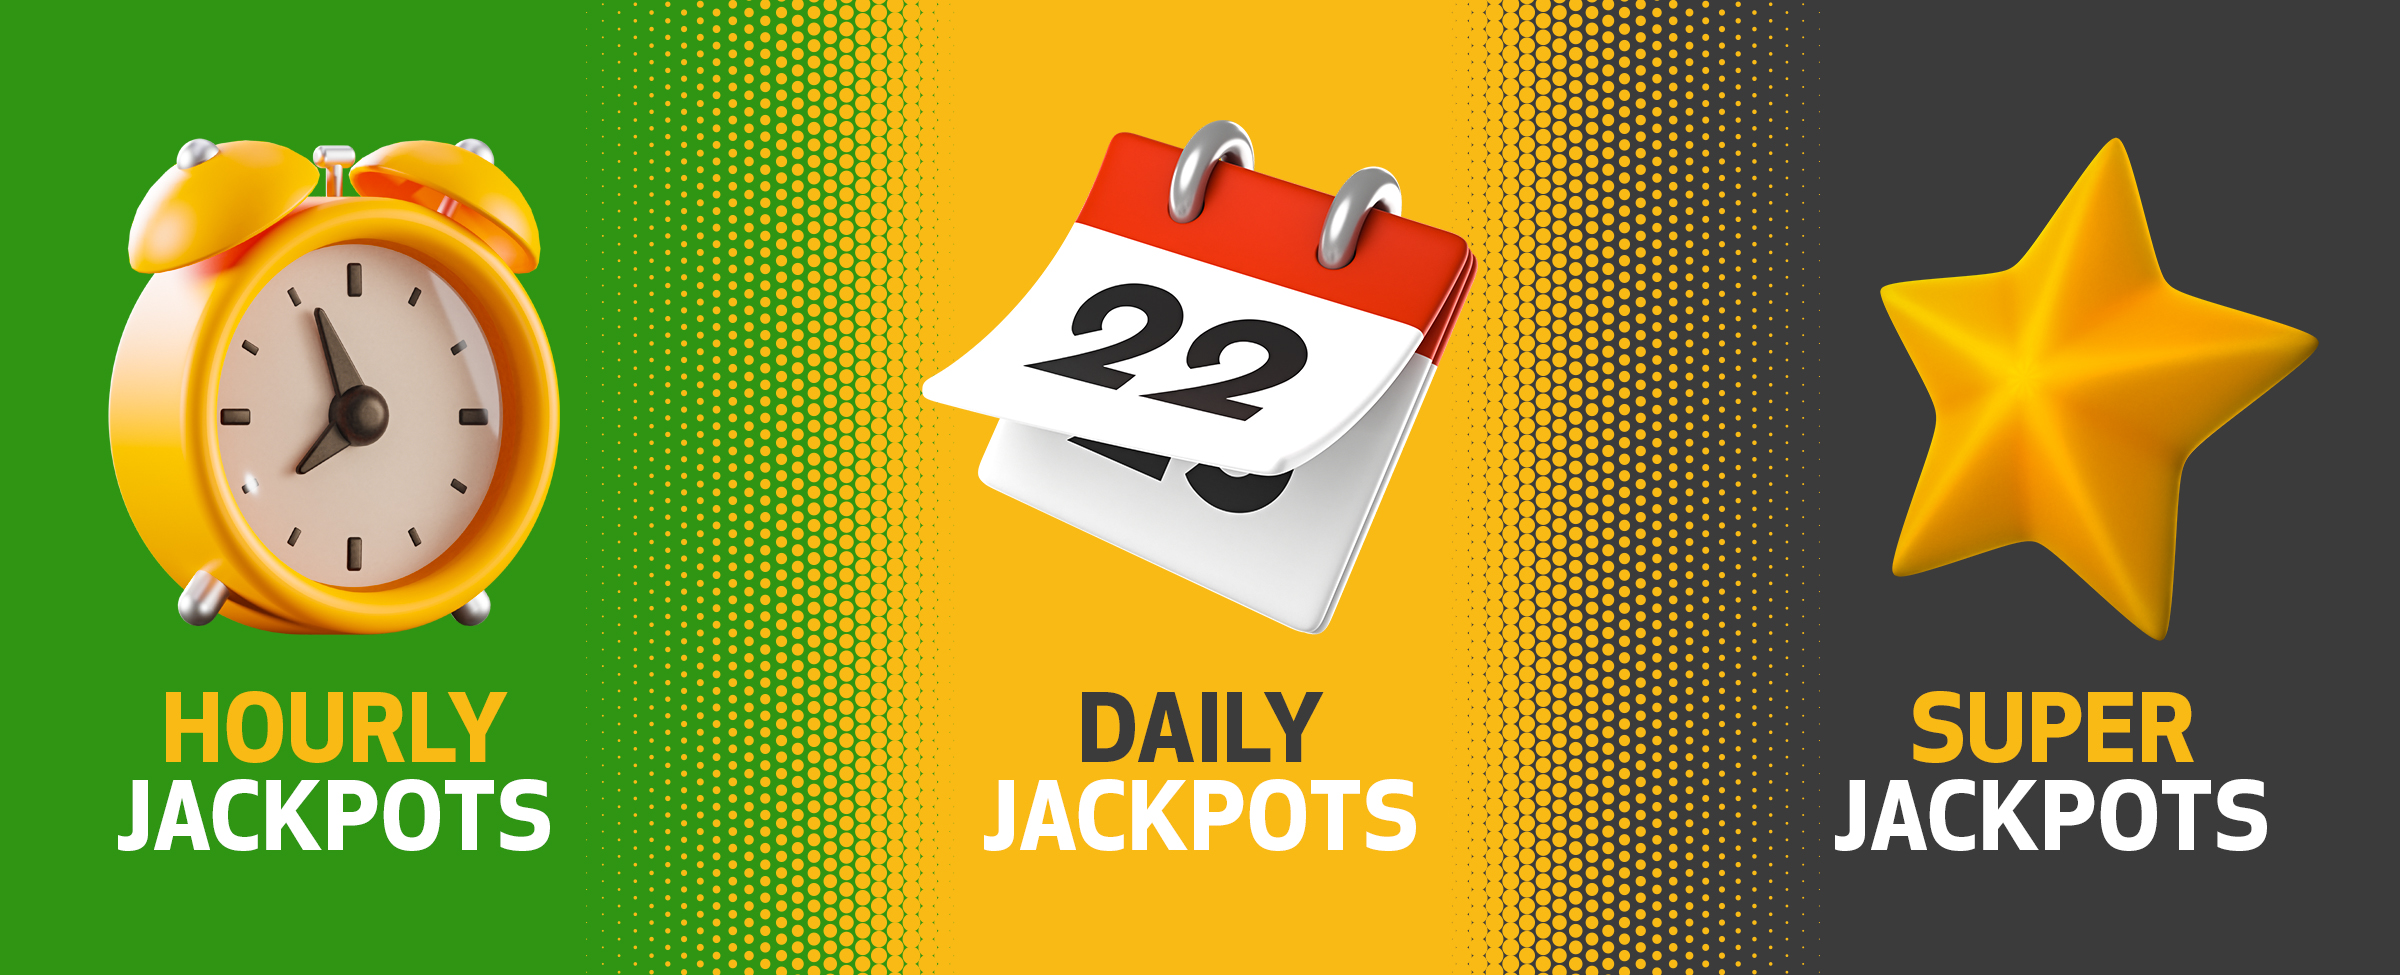 With hourly, daily, and super jackpots, there will be non-stop-winners at Joe Fortune That means more chances to win big.